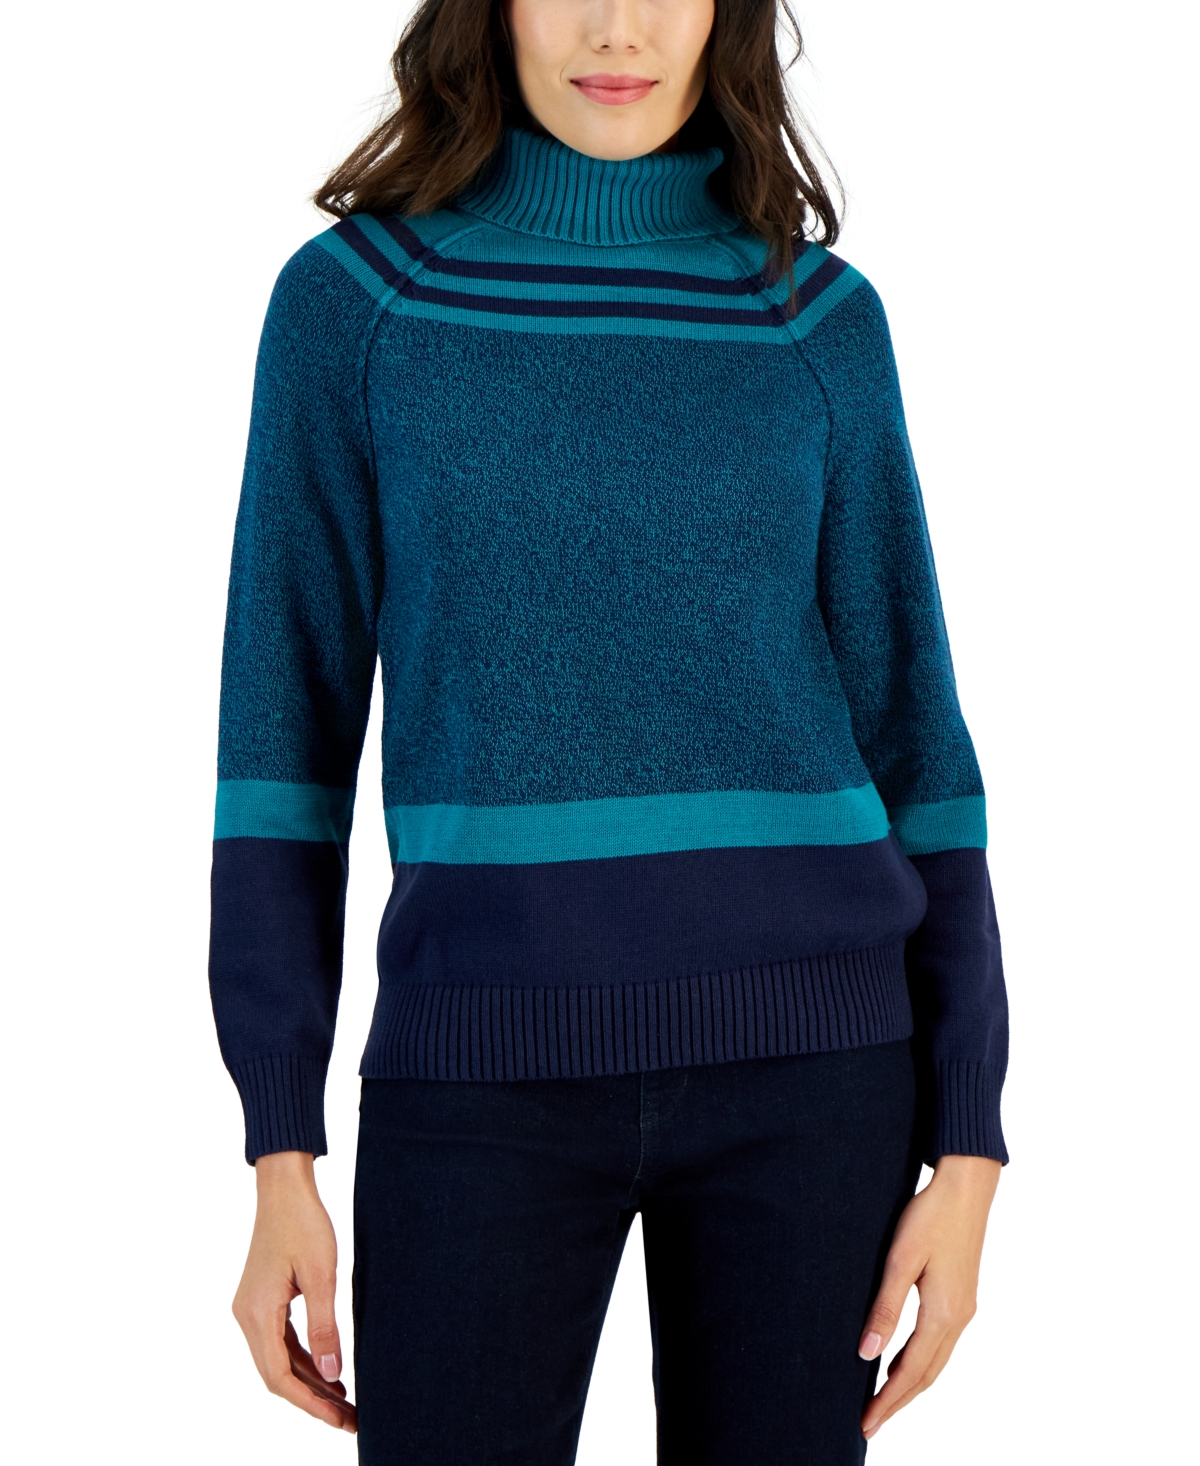 Amelia Cotton Colorblocked Turtleneck Sweater, Created for Macy's - Jazzy Teal